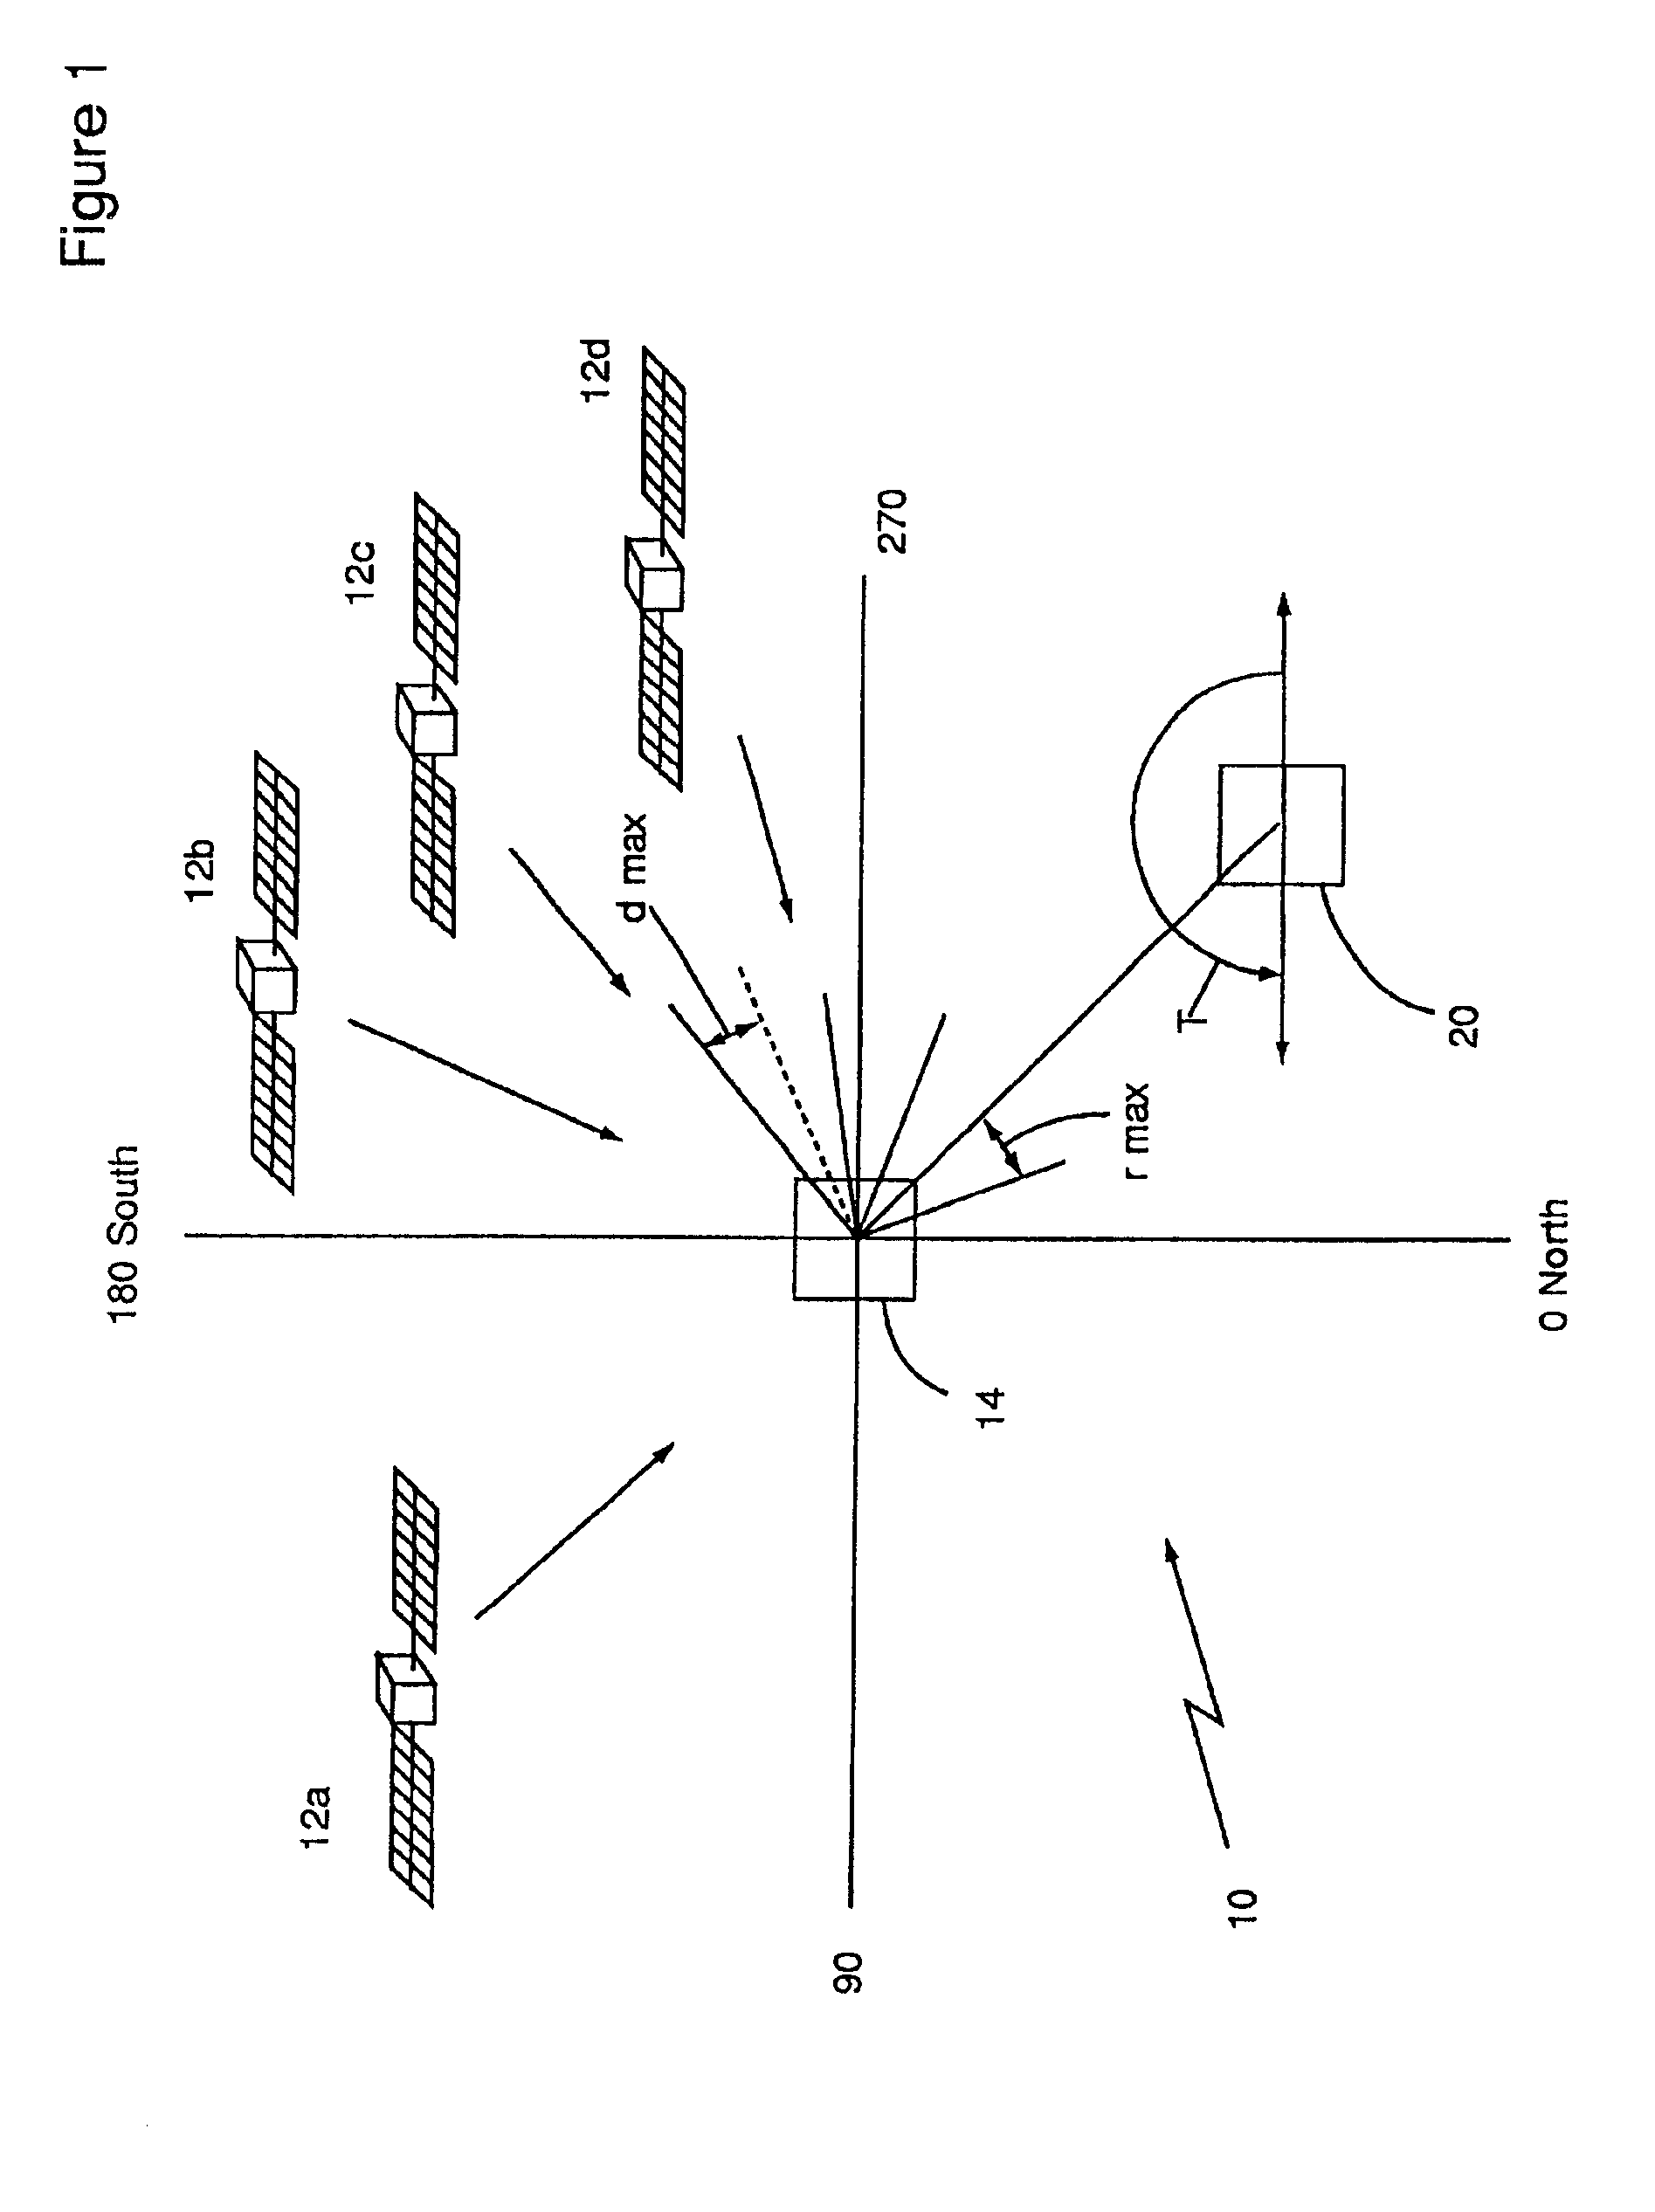 Apparatus and method for transmitting terrestrial signals on a common frequency with satellite transmissions